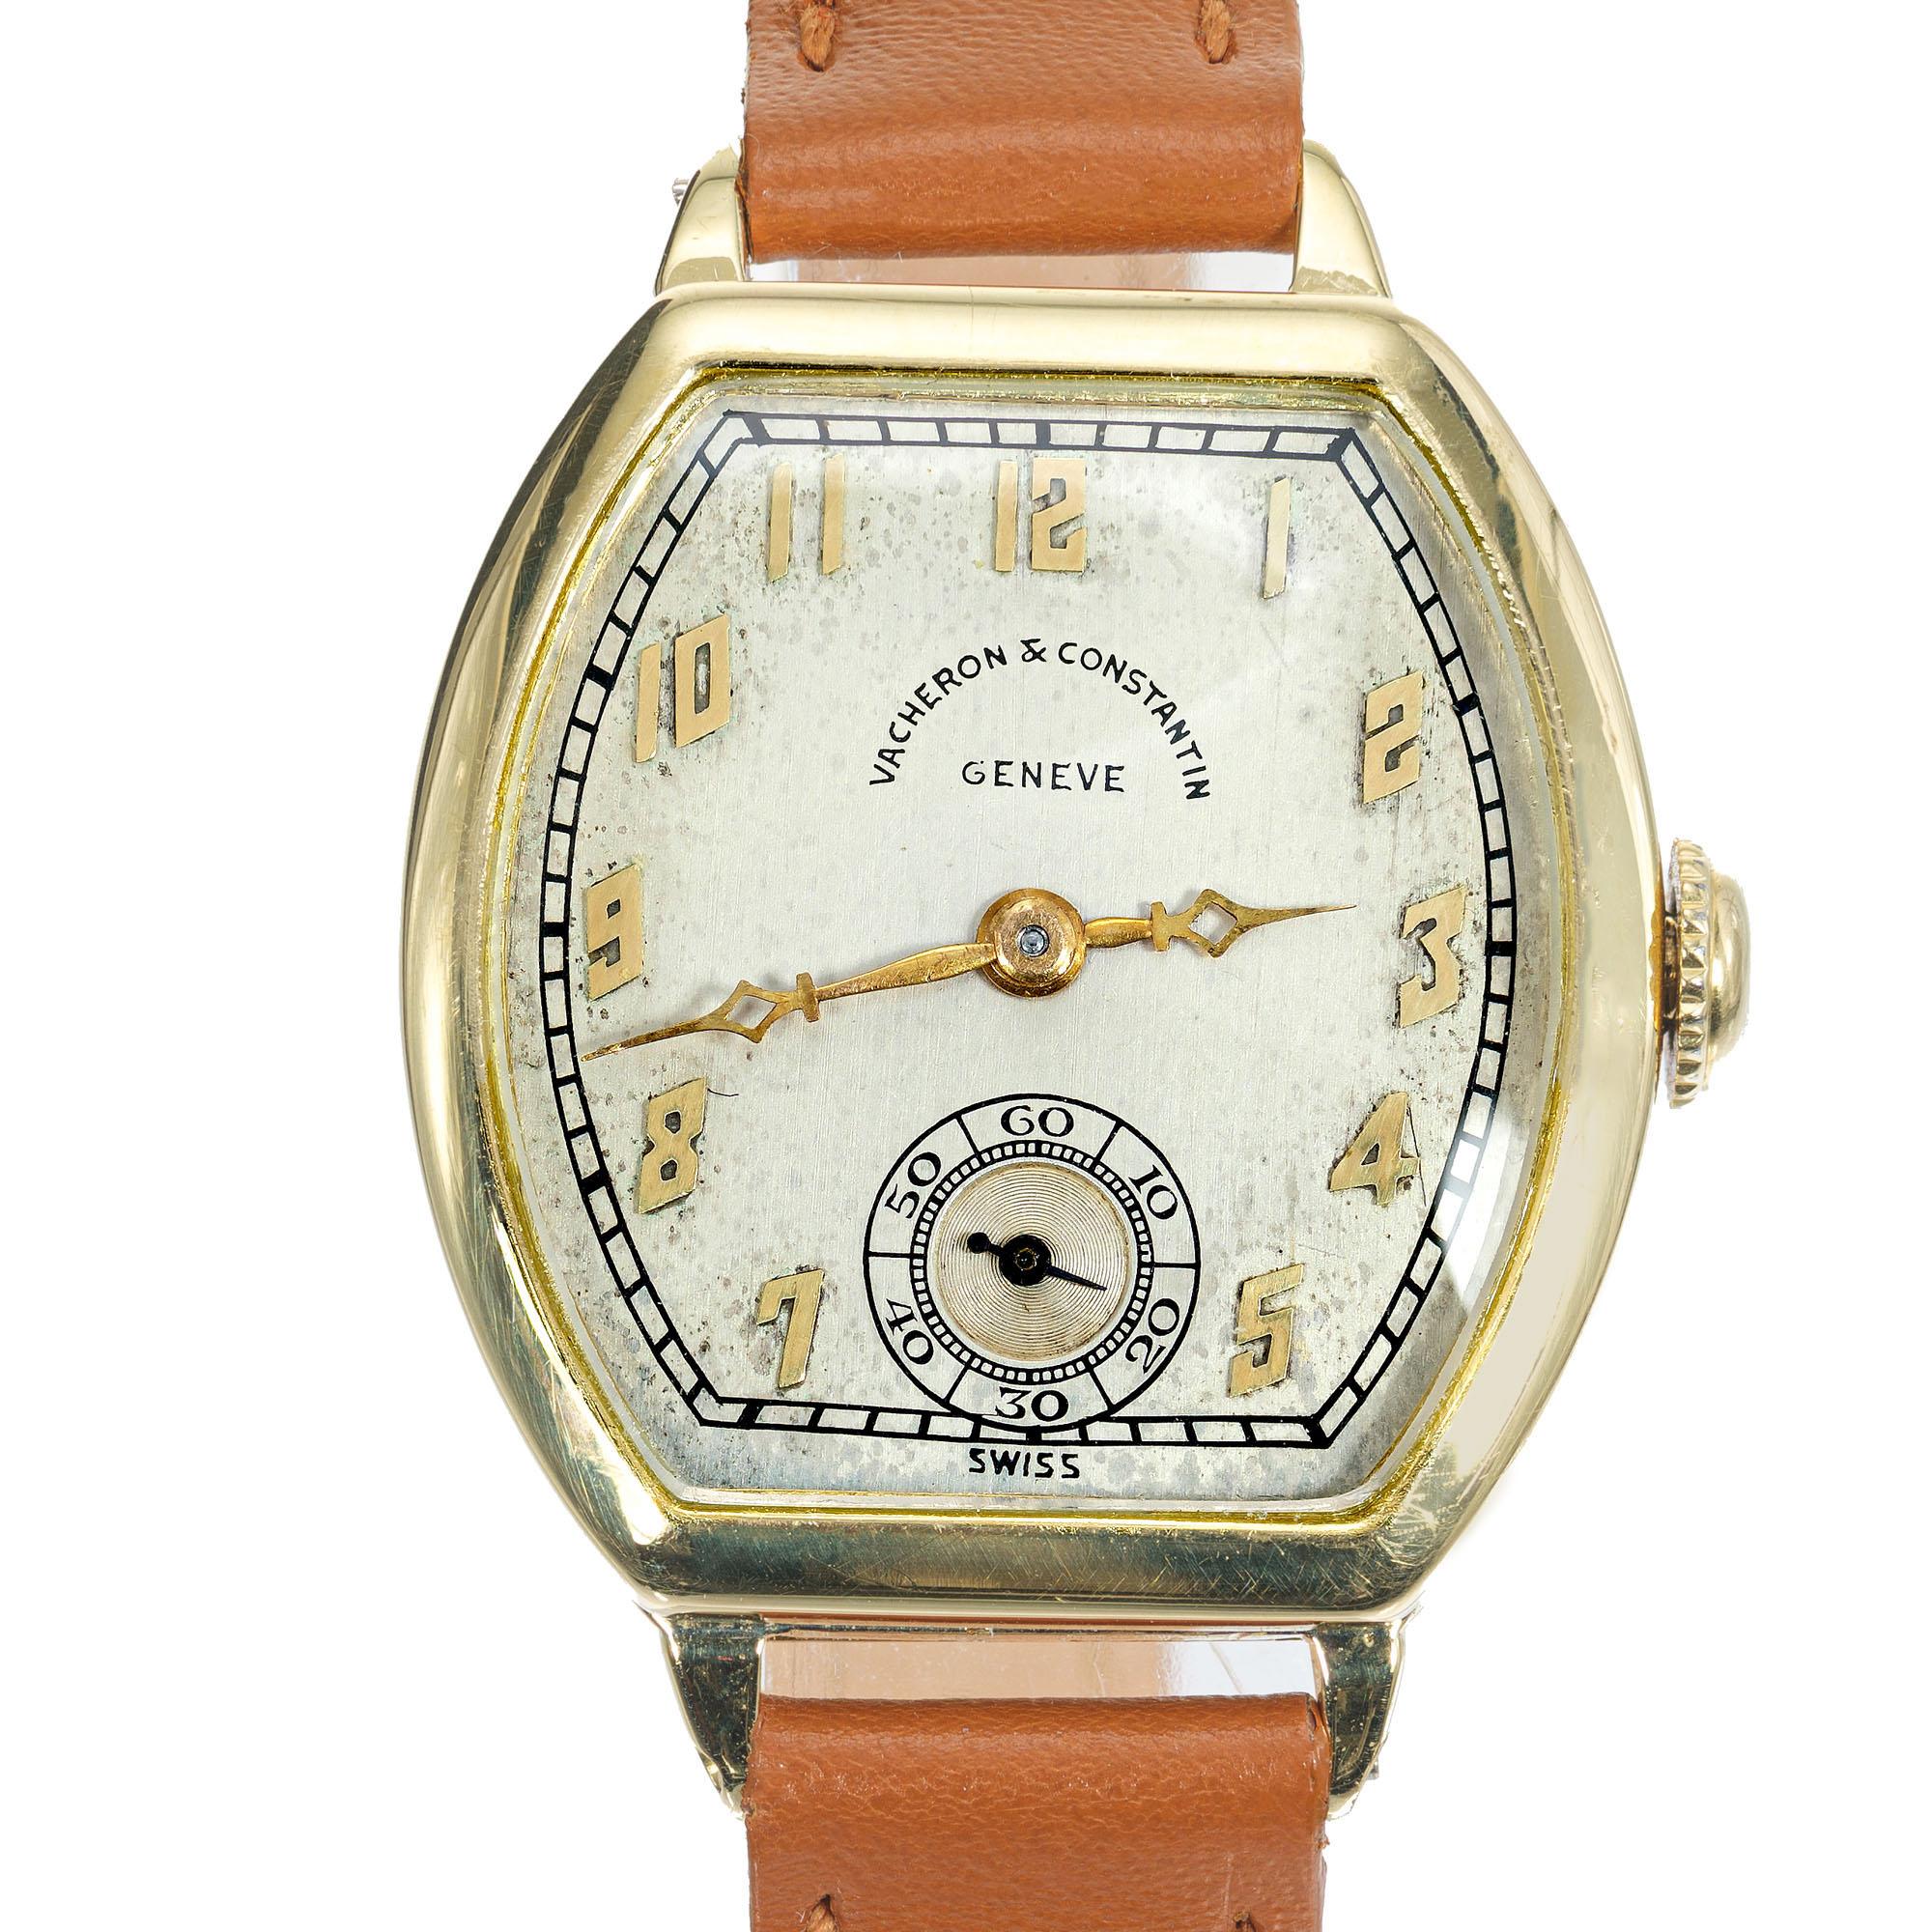 Ladies, original Vacheron Model 250895 movement serial #400600 produced in 1929 in Switzerland. 18k yellow gold bezel.. New French tan leather band. Recently serviced.  Toneau shape case. 

Length: 34mm
Width: 25mm
Band width at case: 11mm
Case